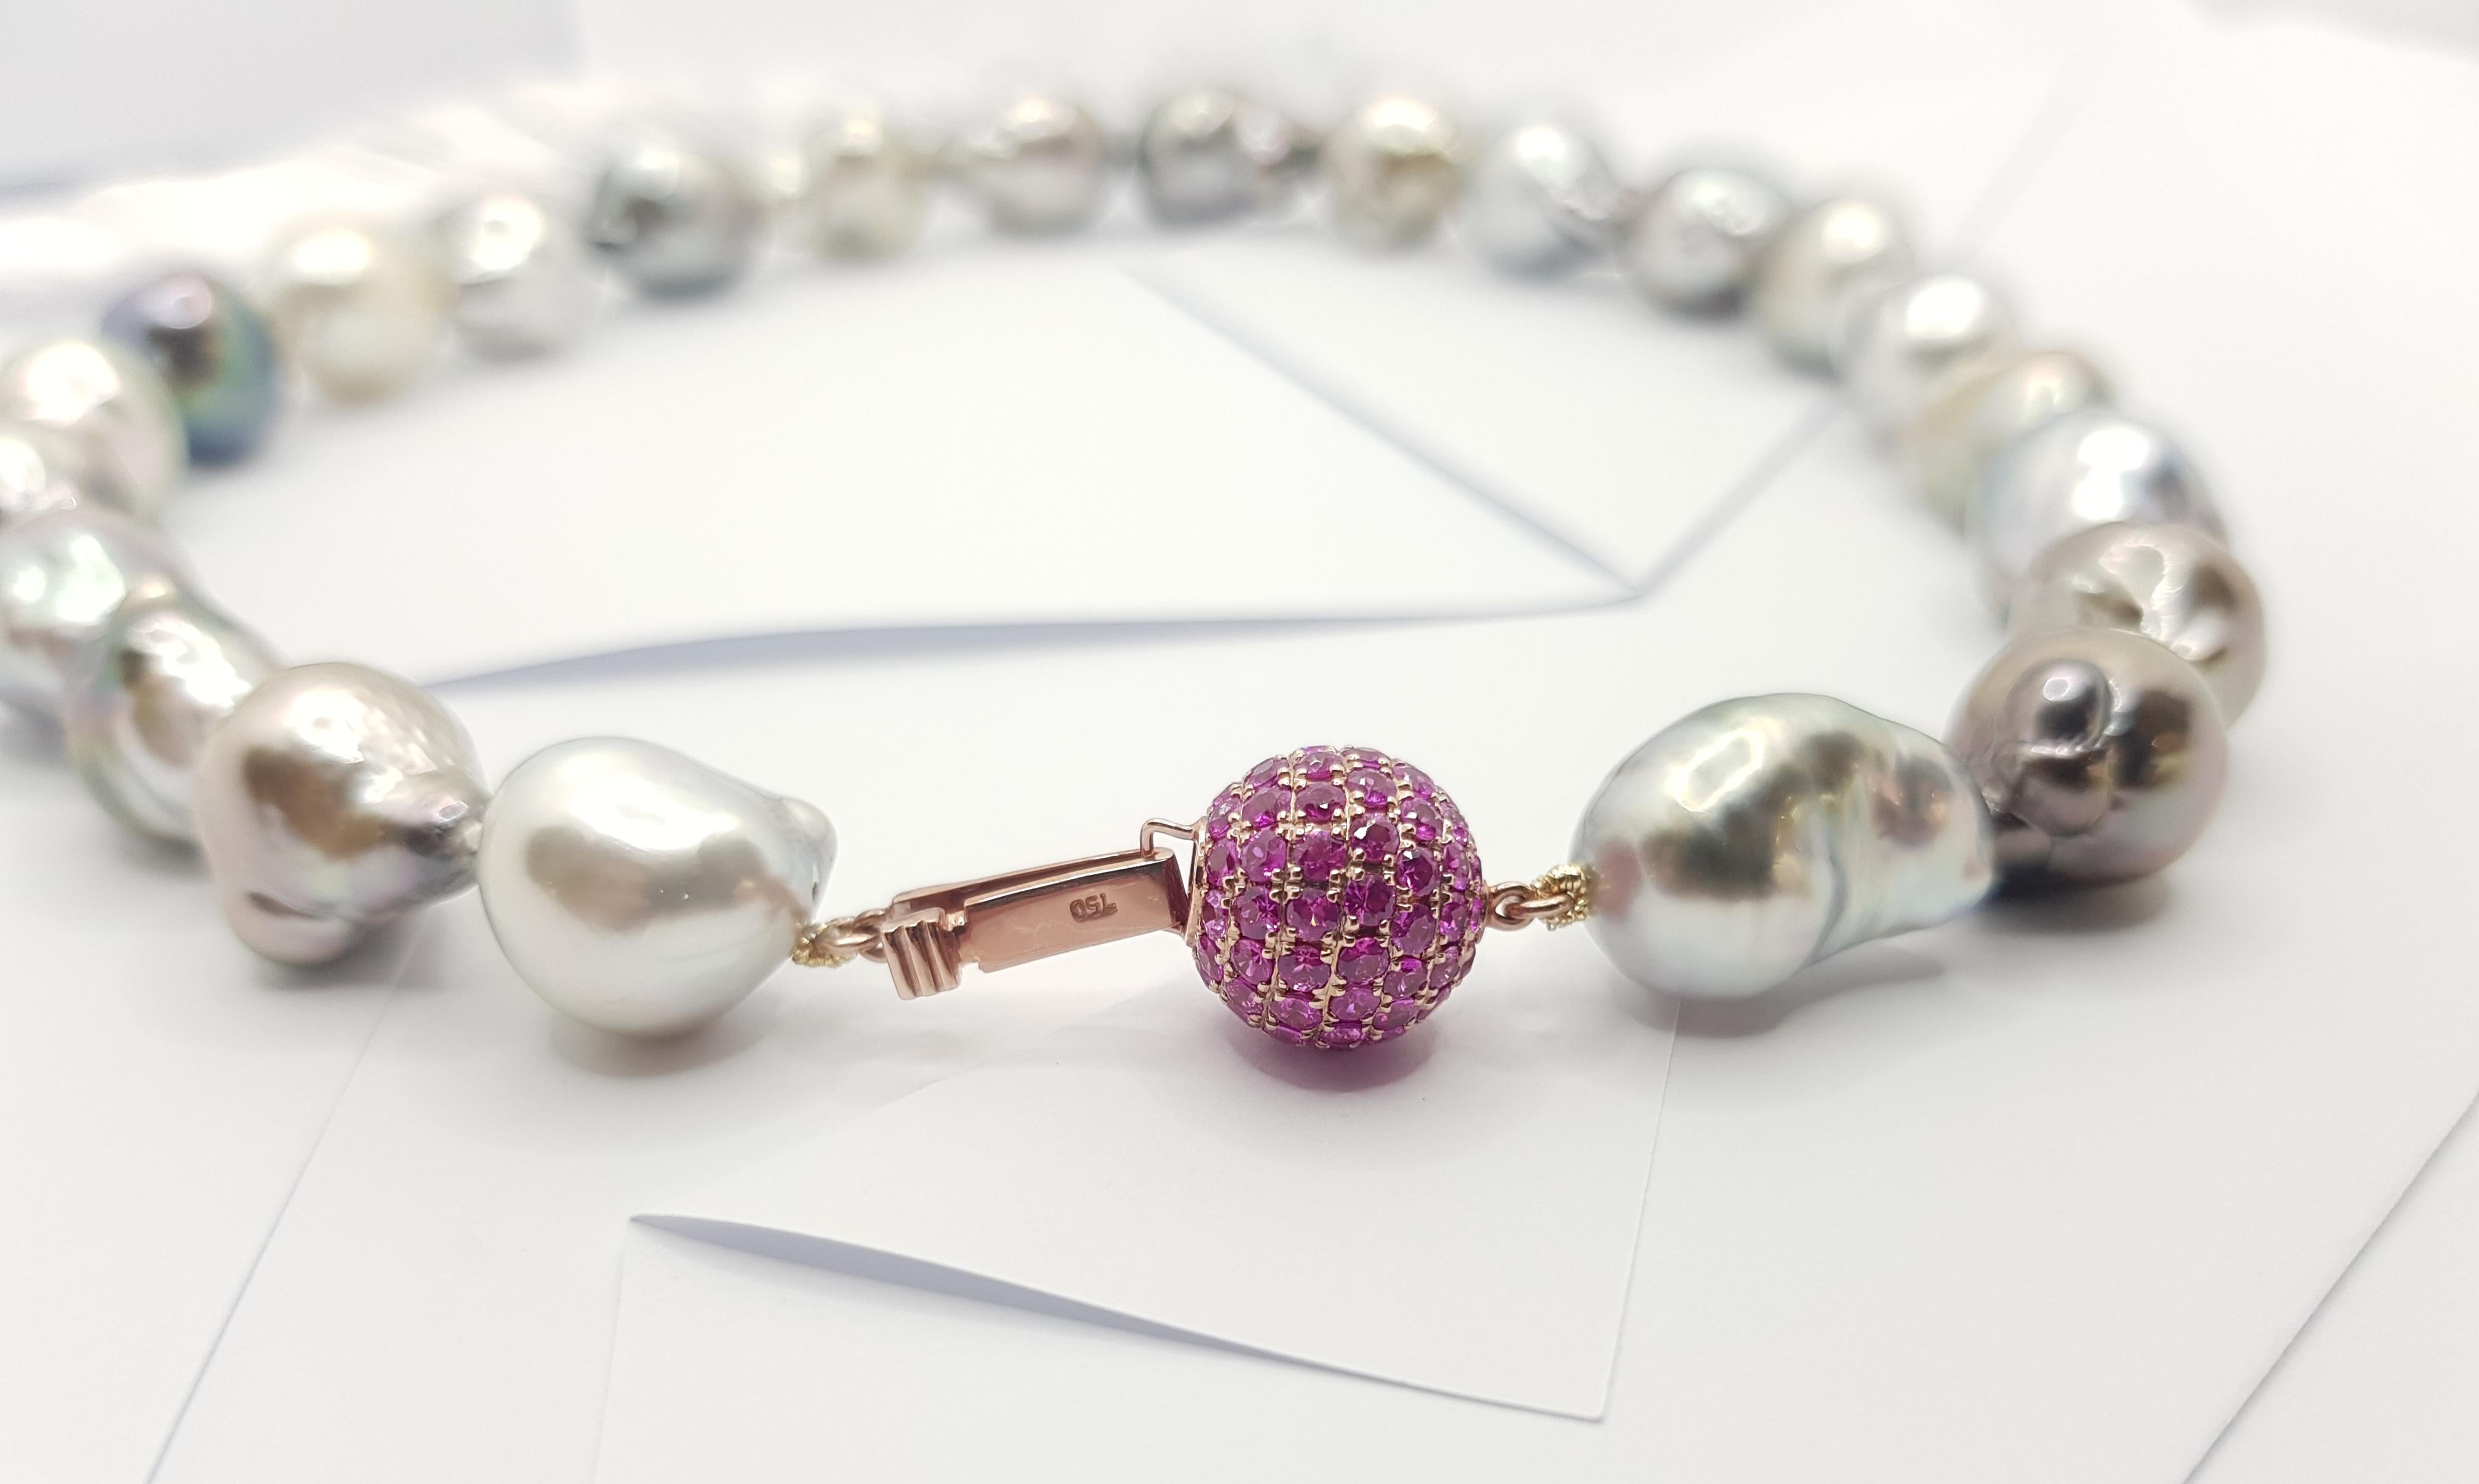 Baroque South Sea Pearl with Pink Sapphire 3.23 Carats Clasp in 18K Rose Gold 1